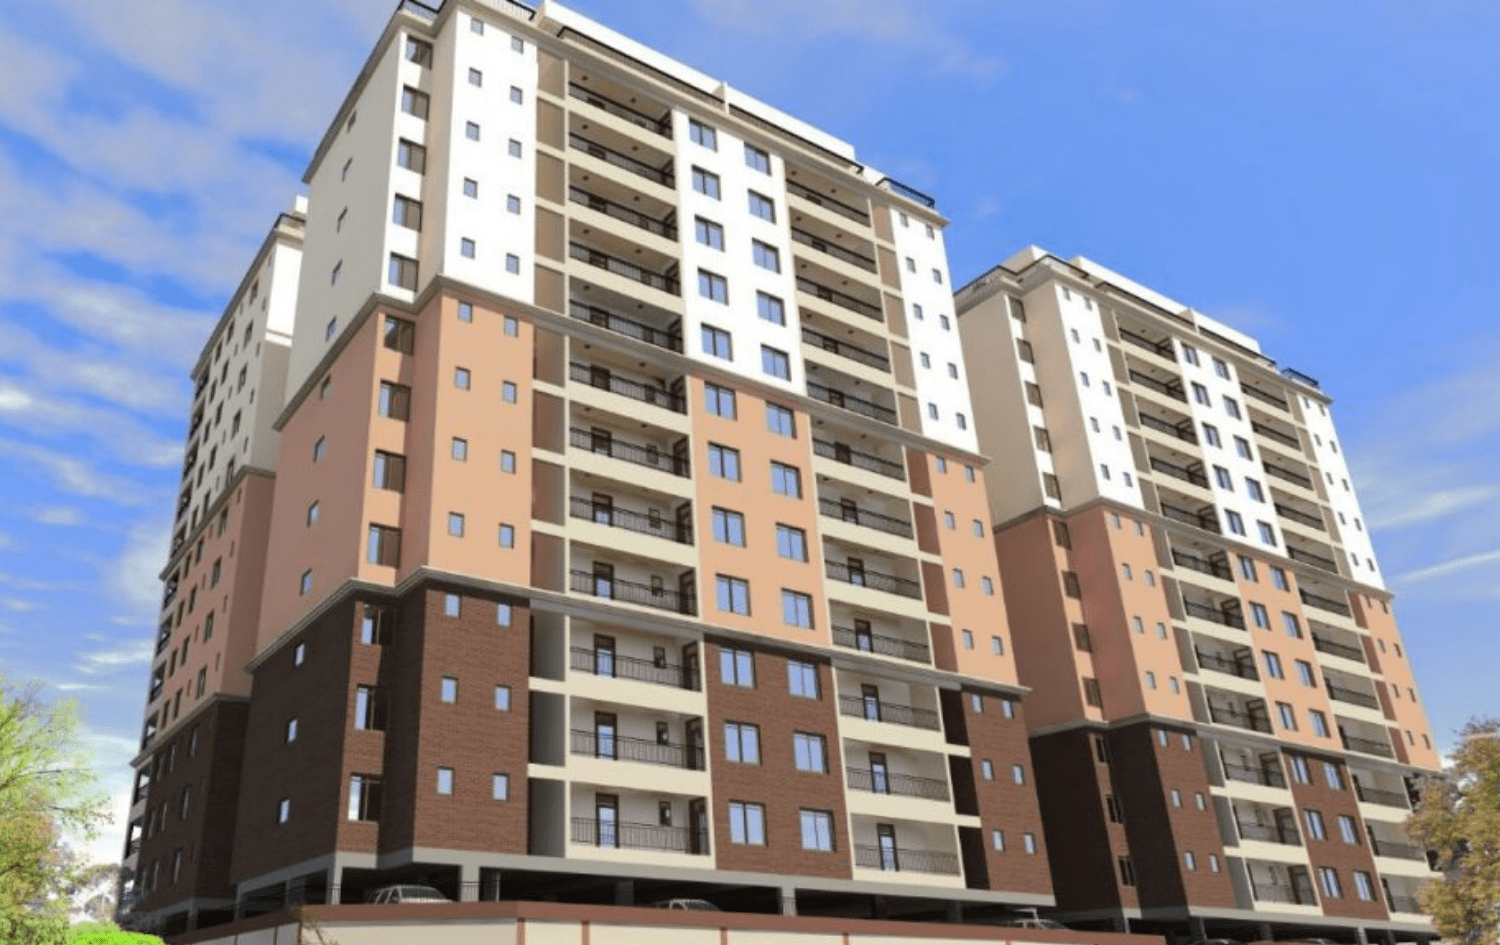 https://whownskenya.com/index.php/2022/11/08/estates-in-nairobi-where-apartment-buildings-are-banned/